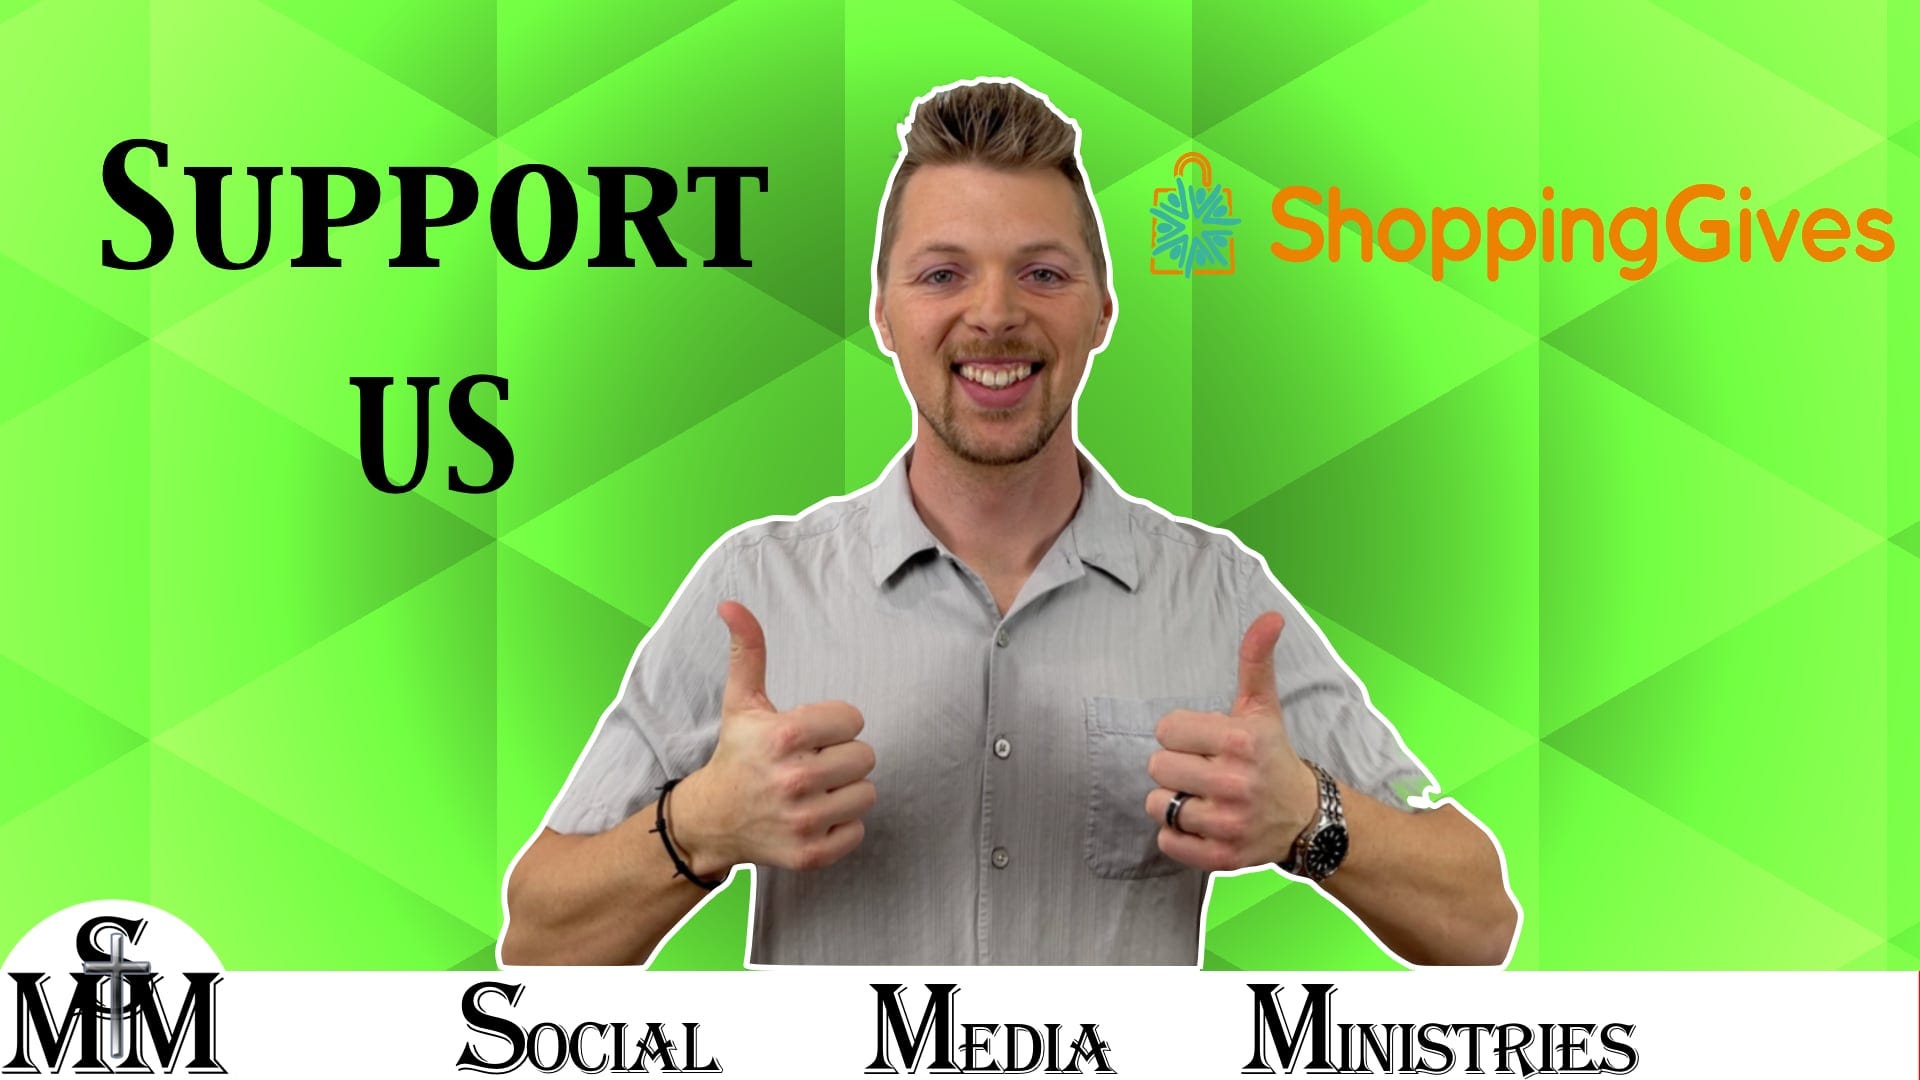 Support Social Media Ministries With Shopping Gives